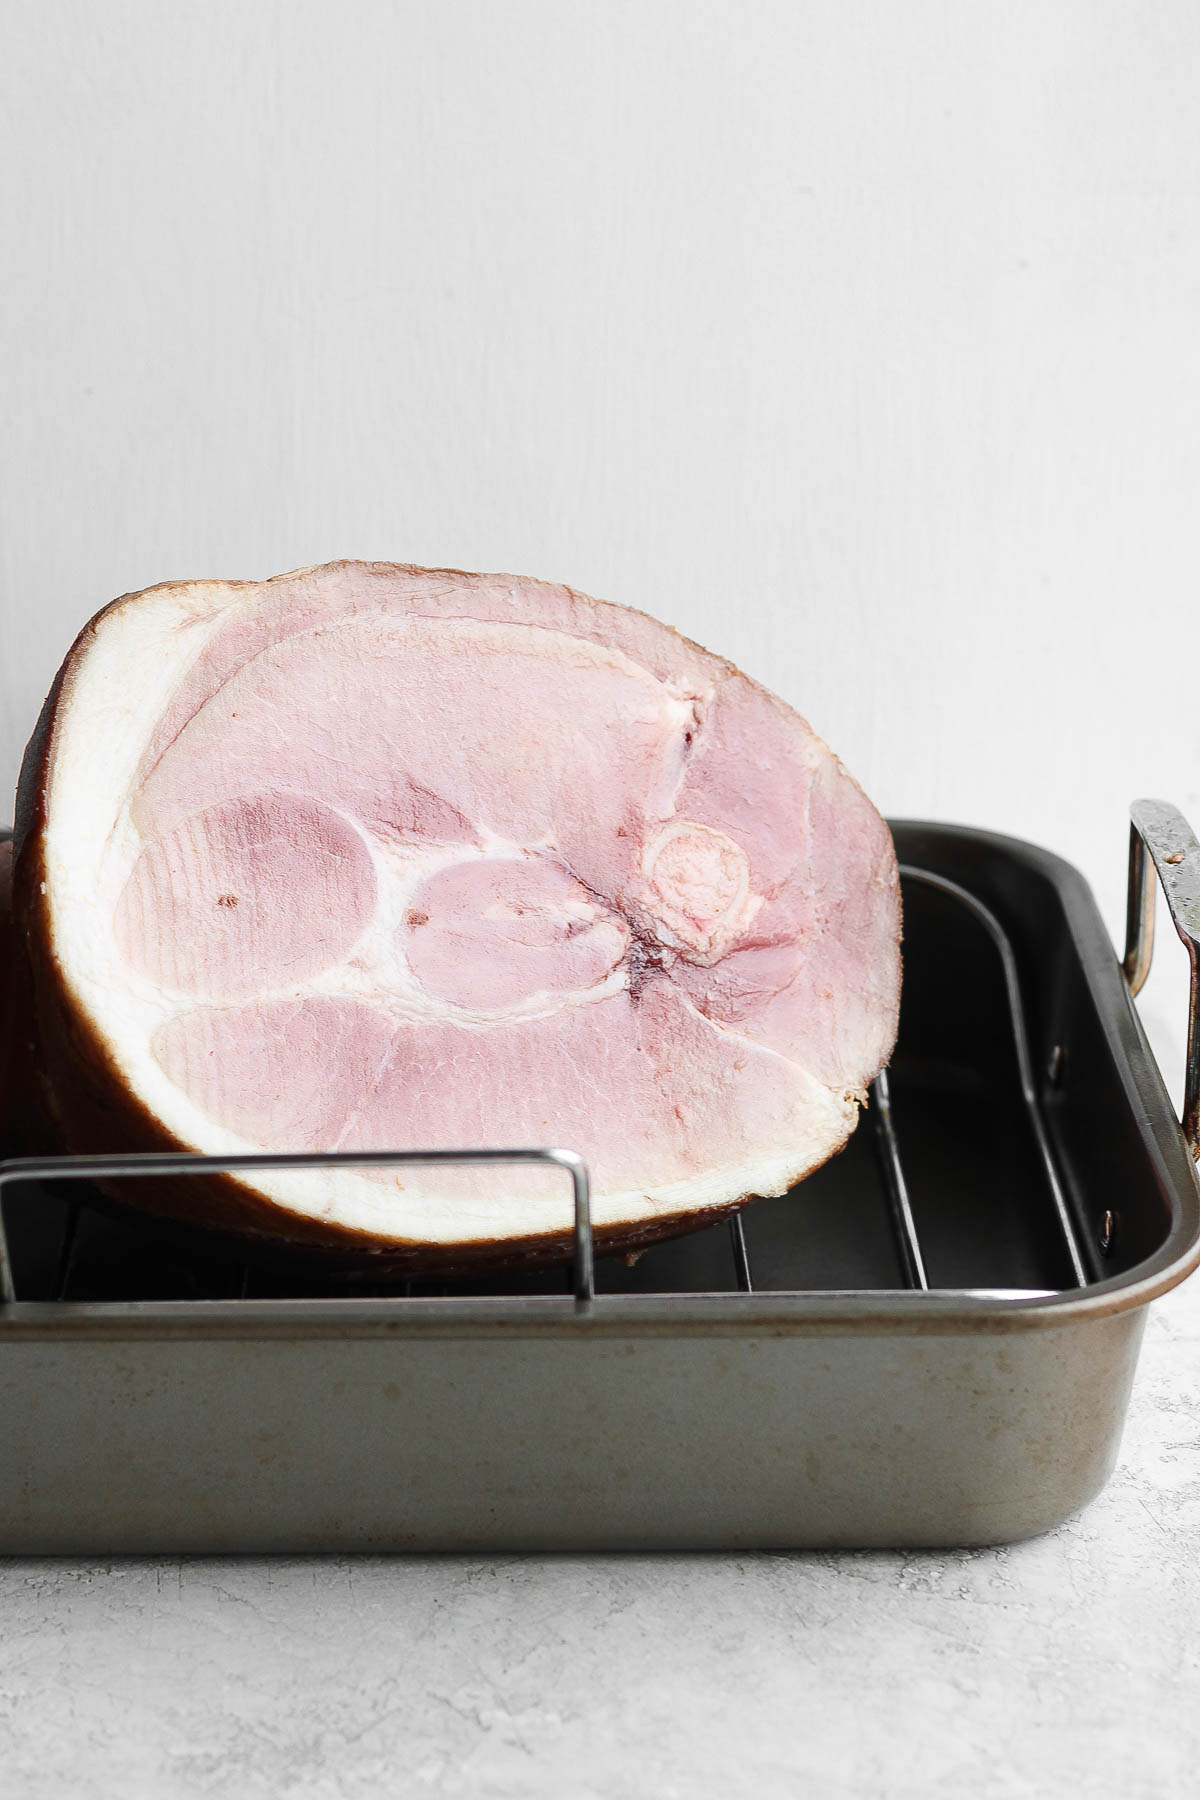 Ham in a roasting pan before being cooked.